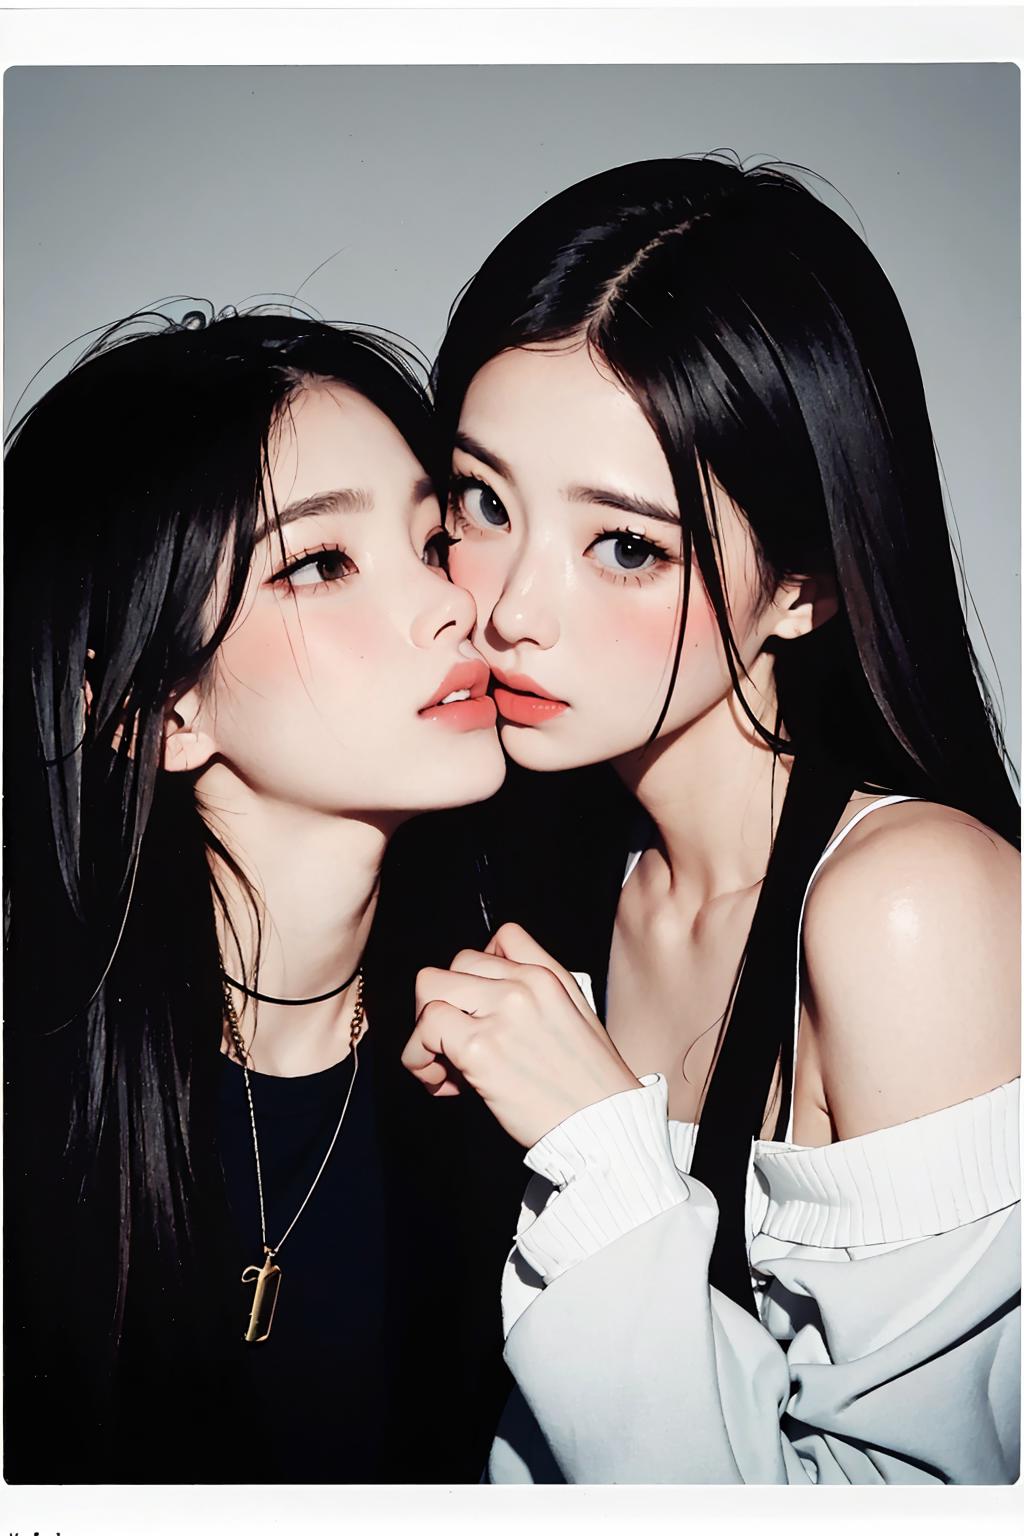 Two Asian women with dark hair, wearing white shirts, share a kiss.